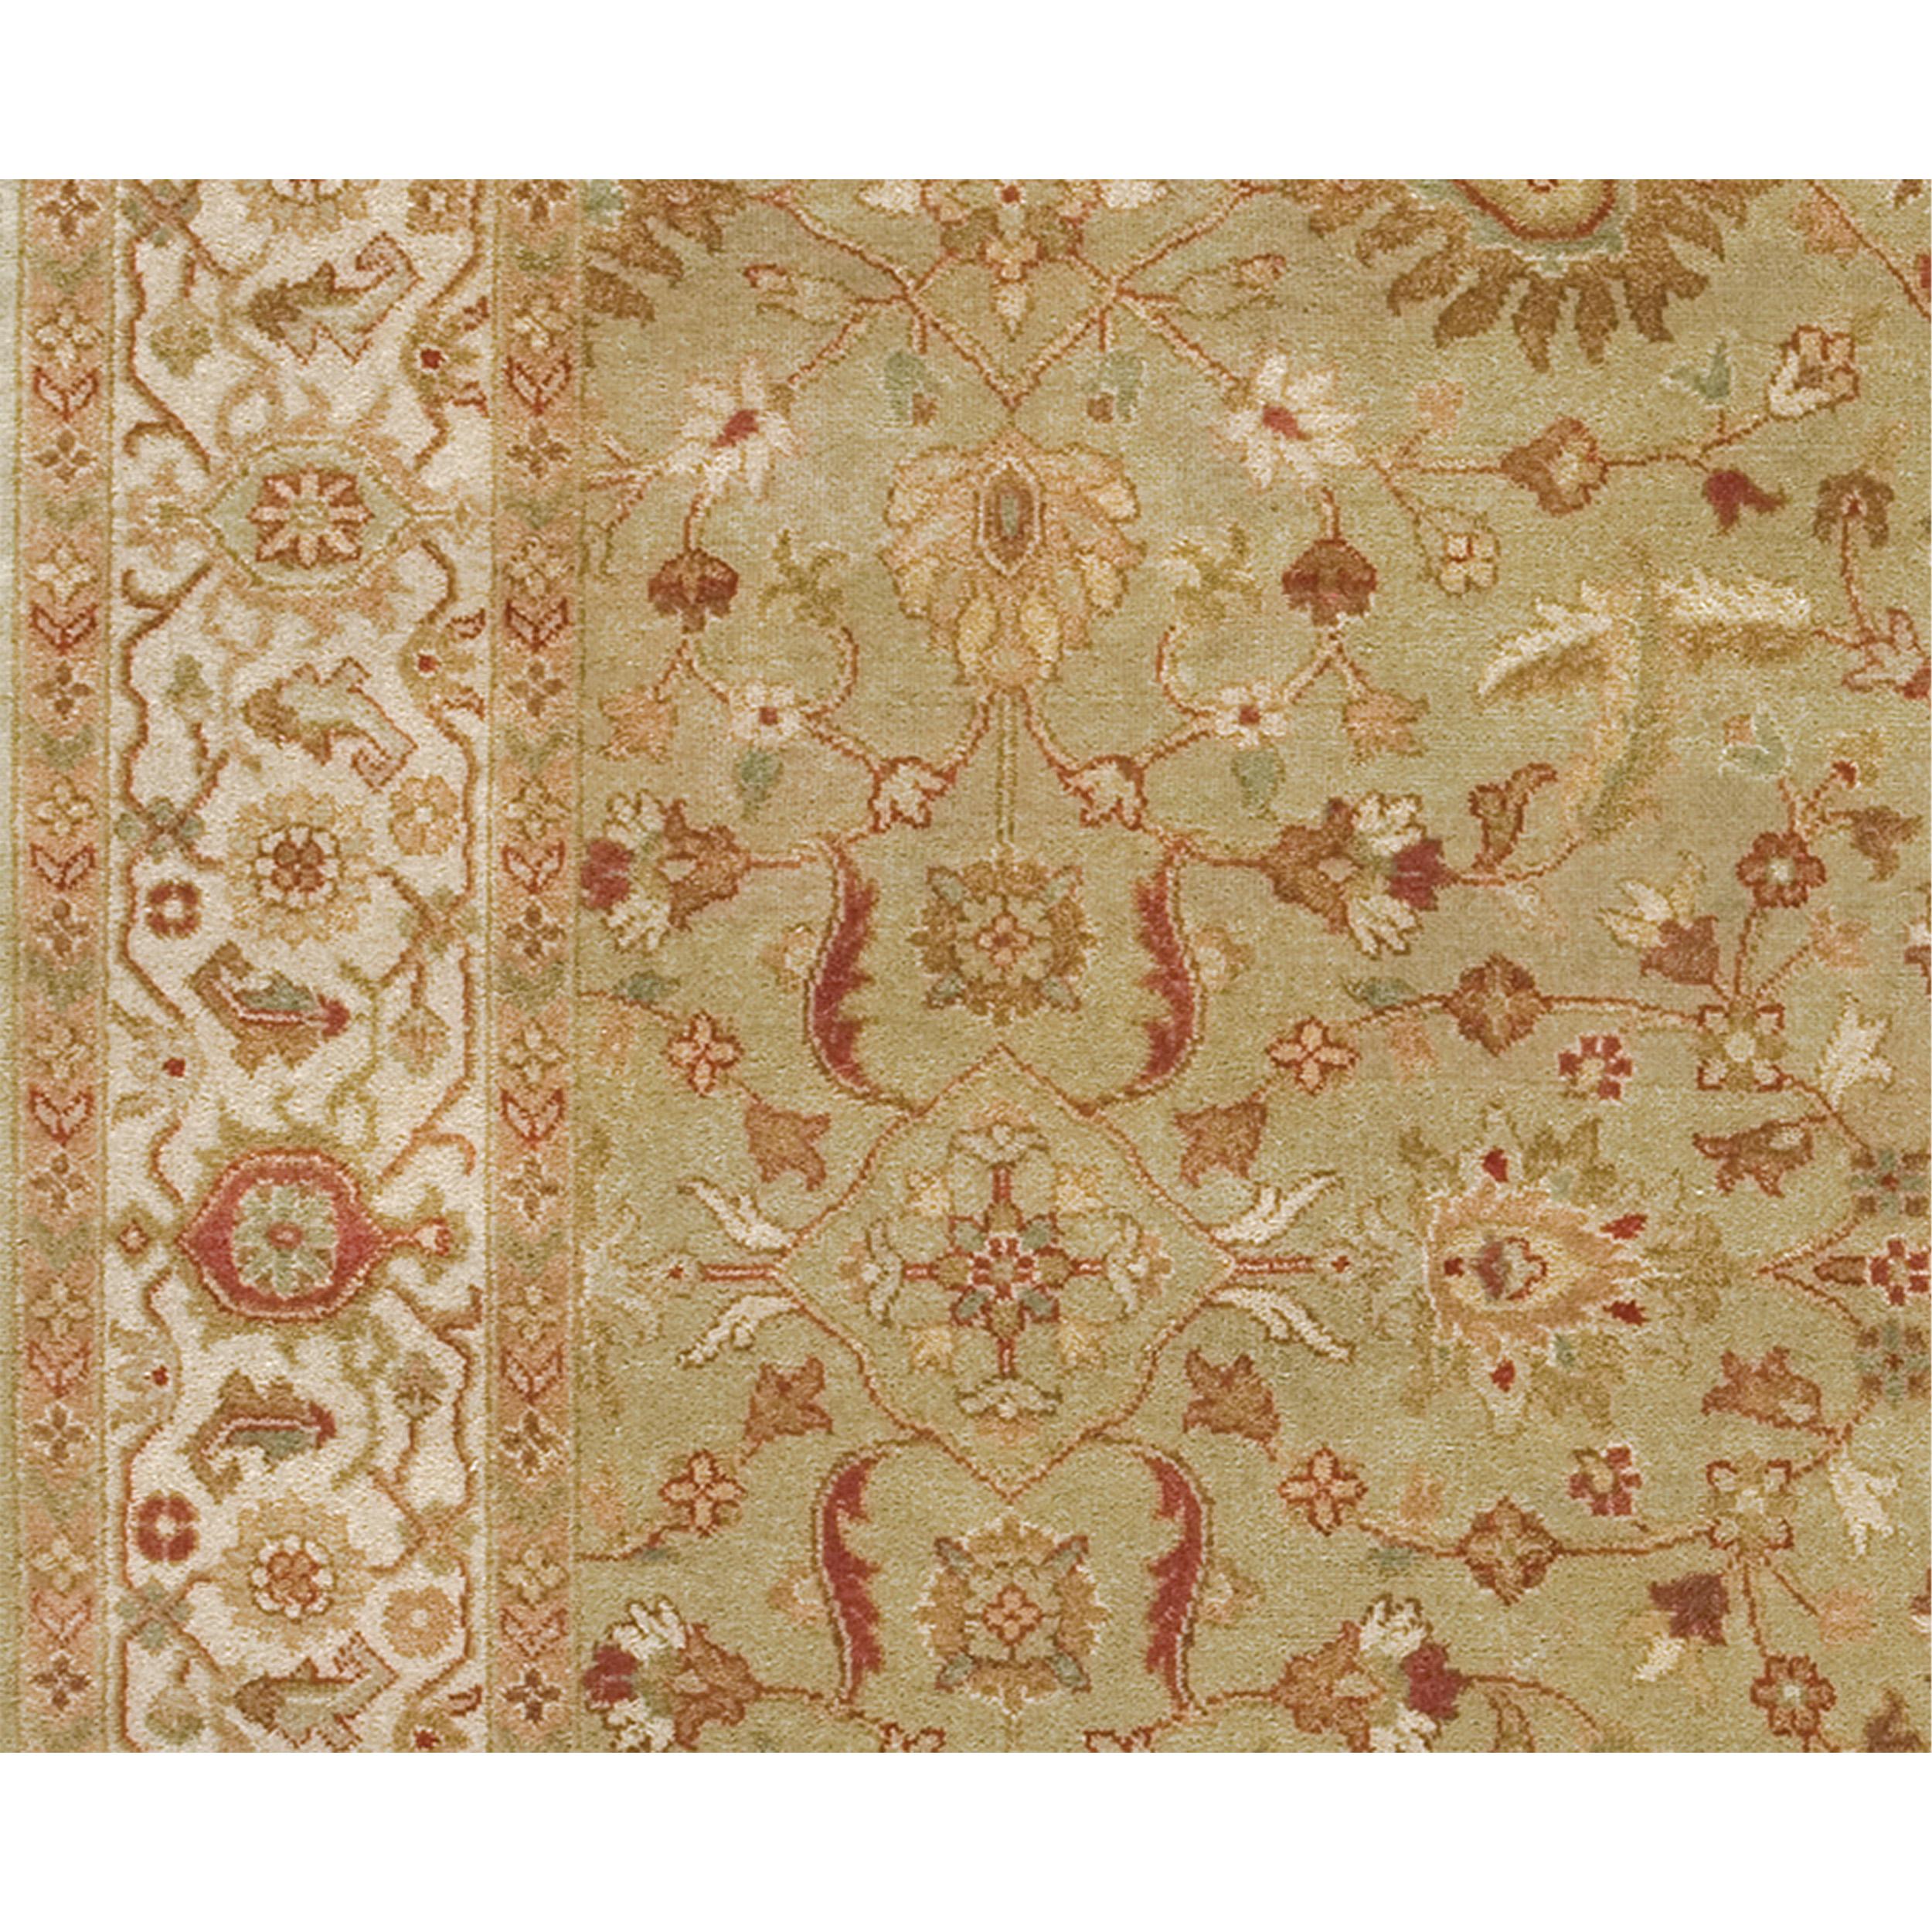 Luxury Traditional Hand-Knotted Oushak Pistachio & Ivory 12x22 Rug  In New Condition For Sale In Secaucus, NJ